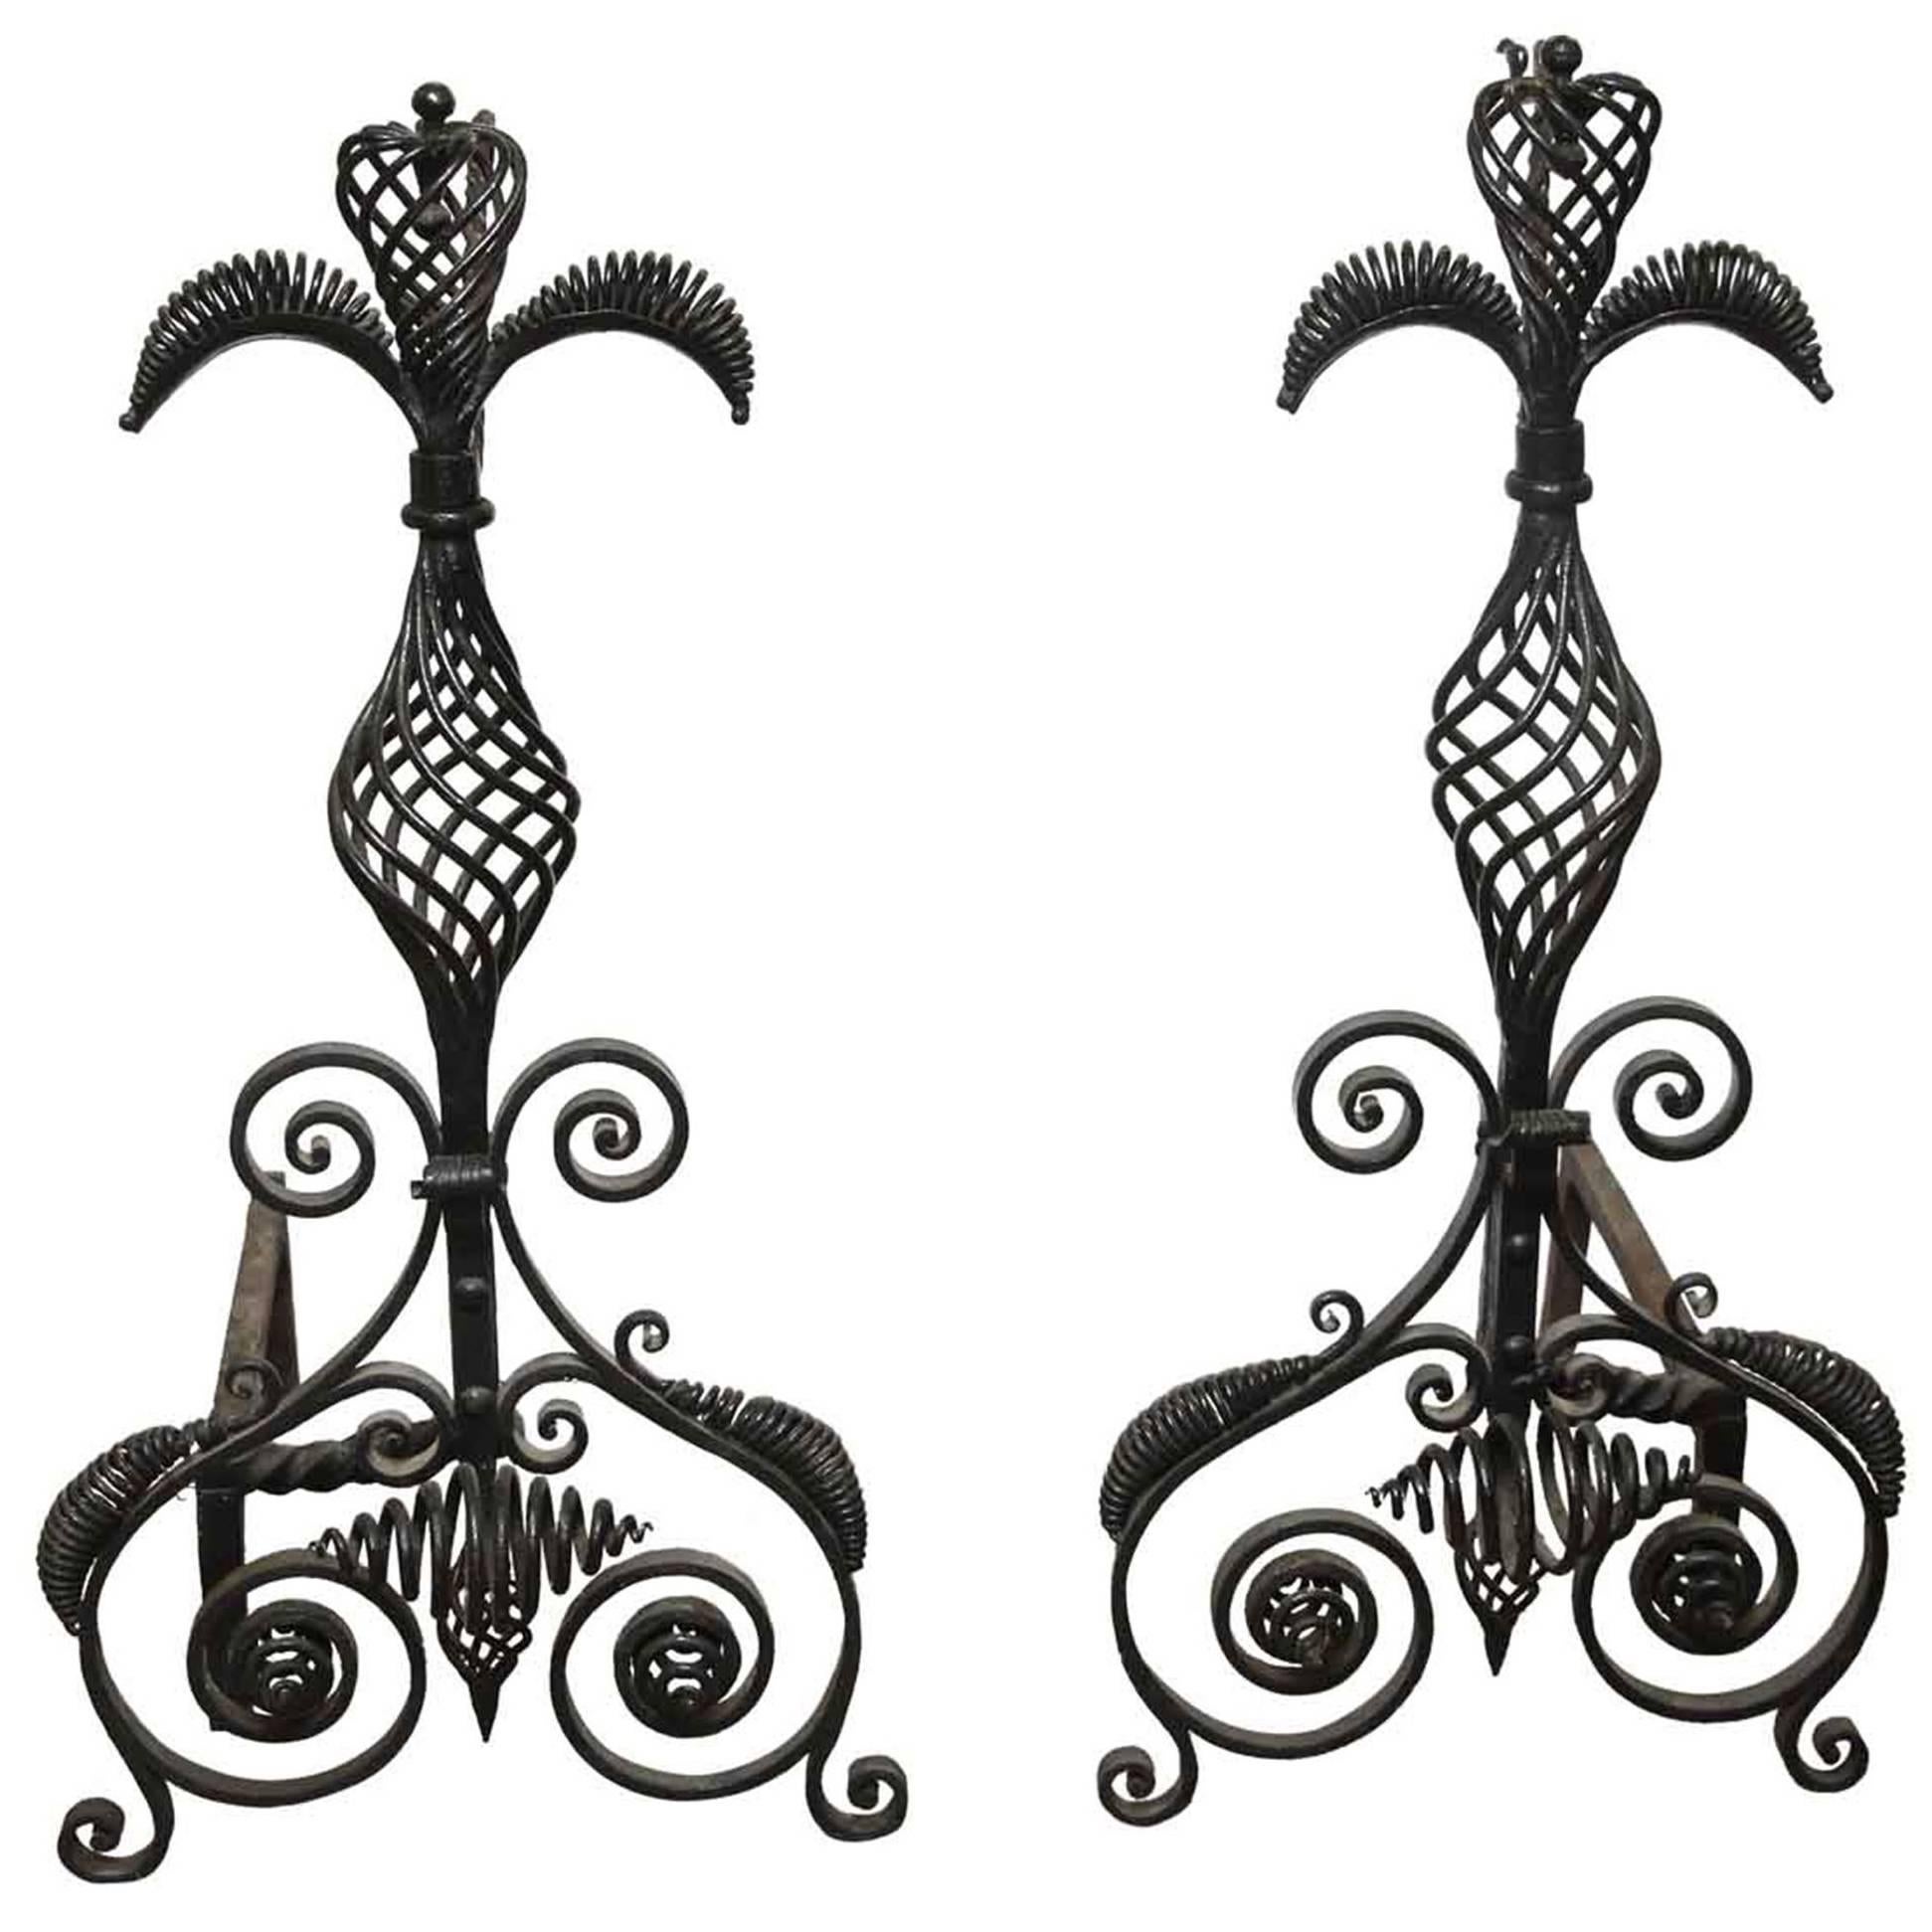 1880s Pair of Unique Large Blacksmith Hand-Wrought Iron Fireplace Andirons